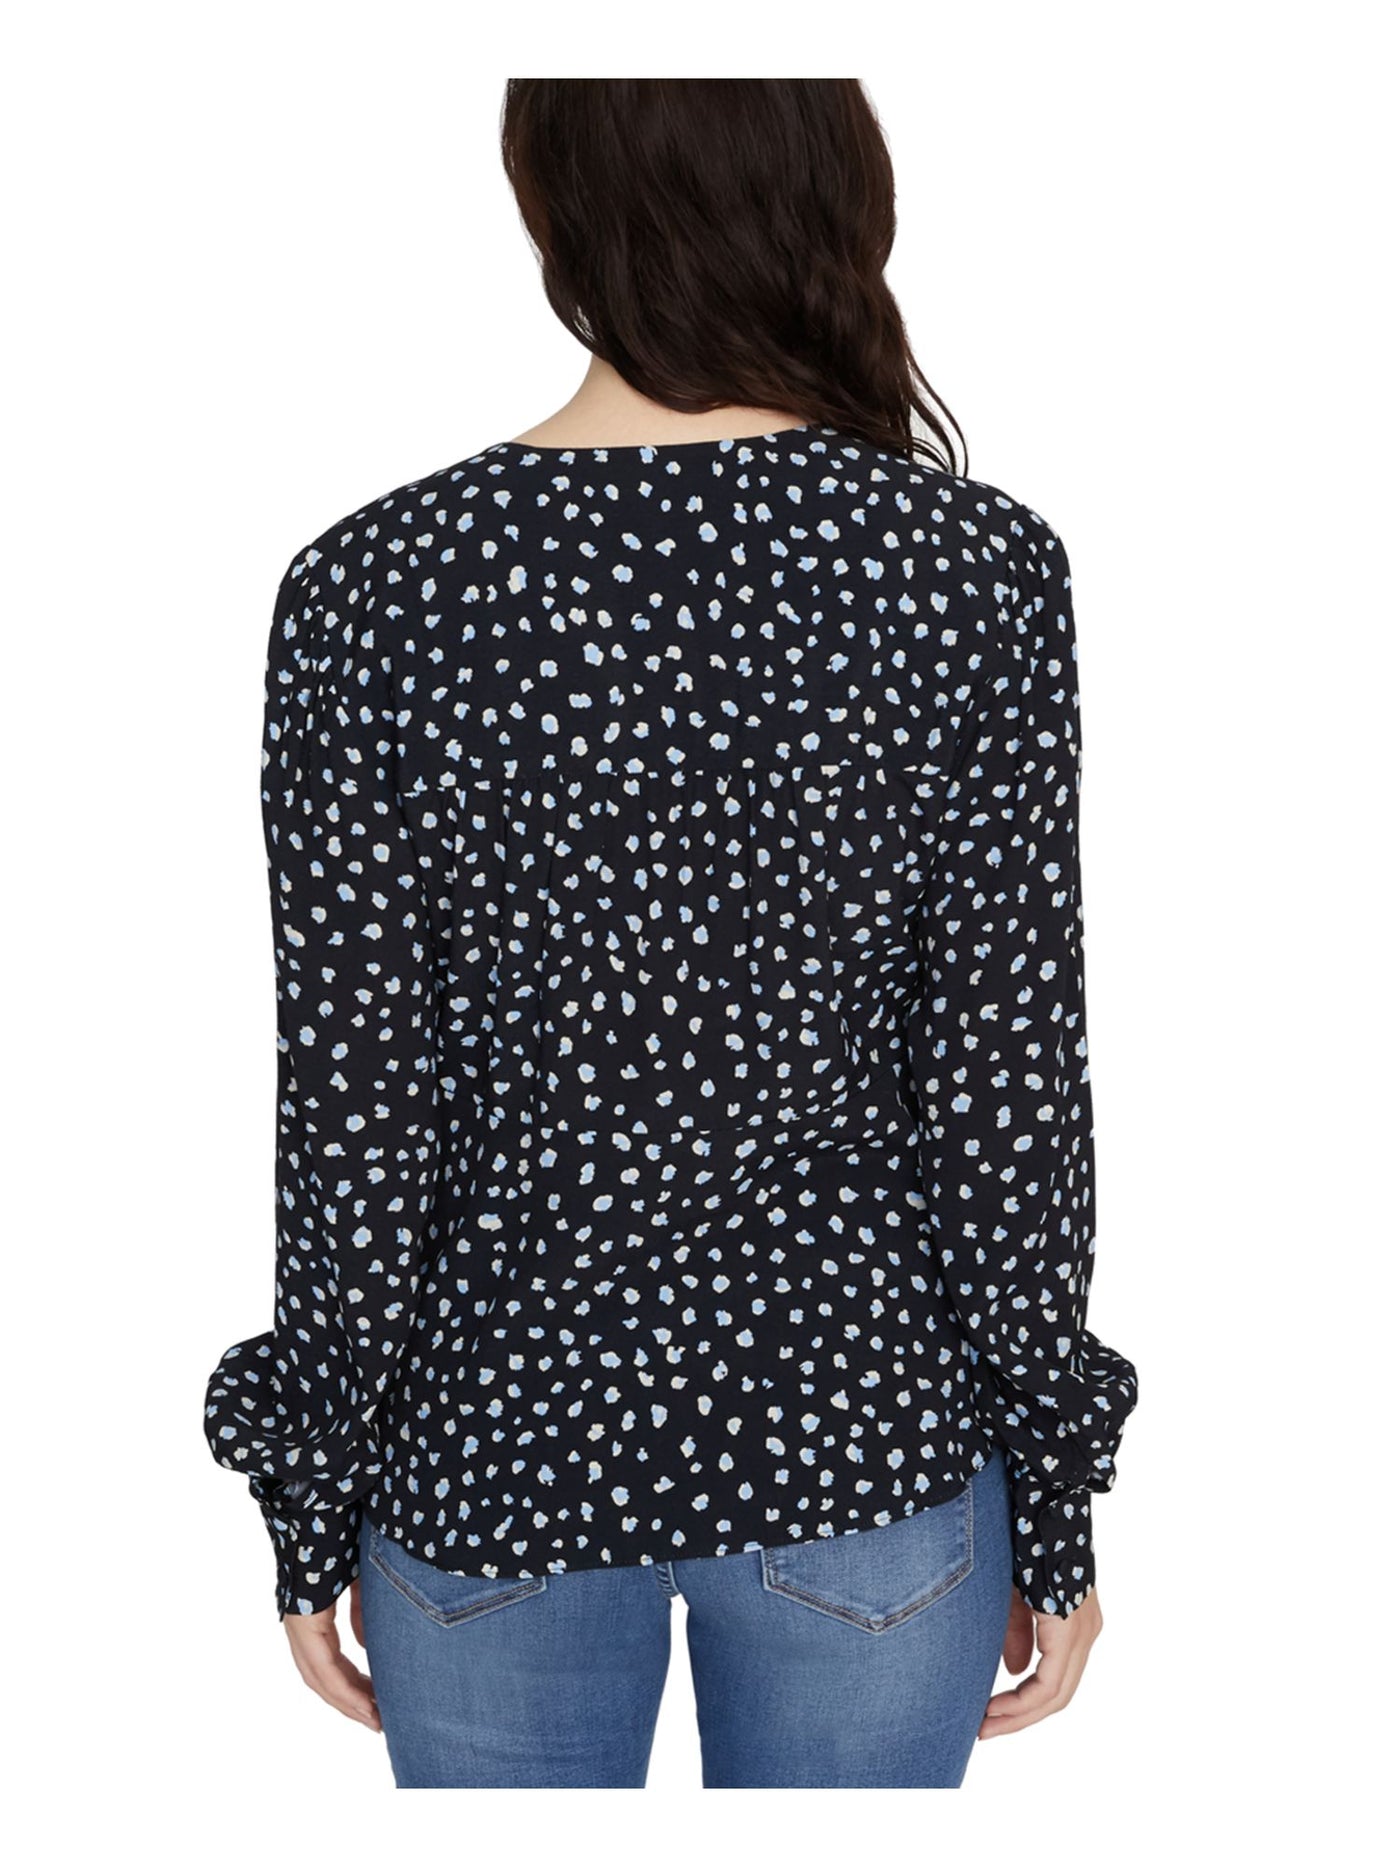 SANCTUARY Womens Navy Speckle Long Sleeve V Neck Top M